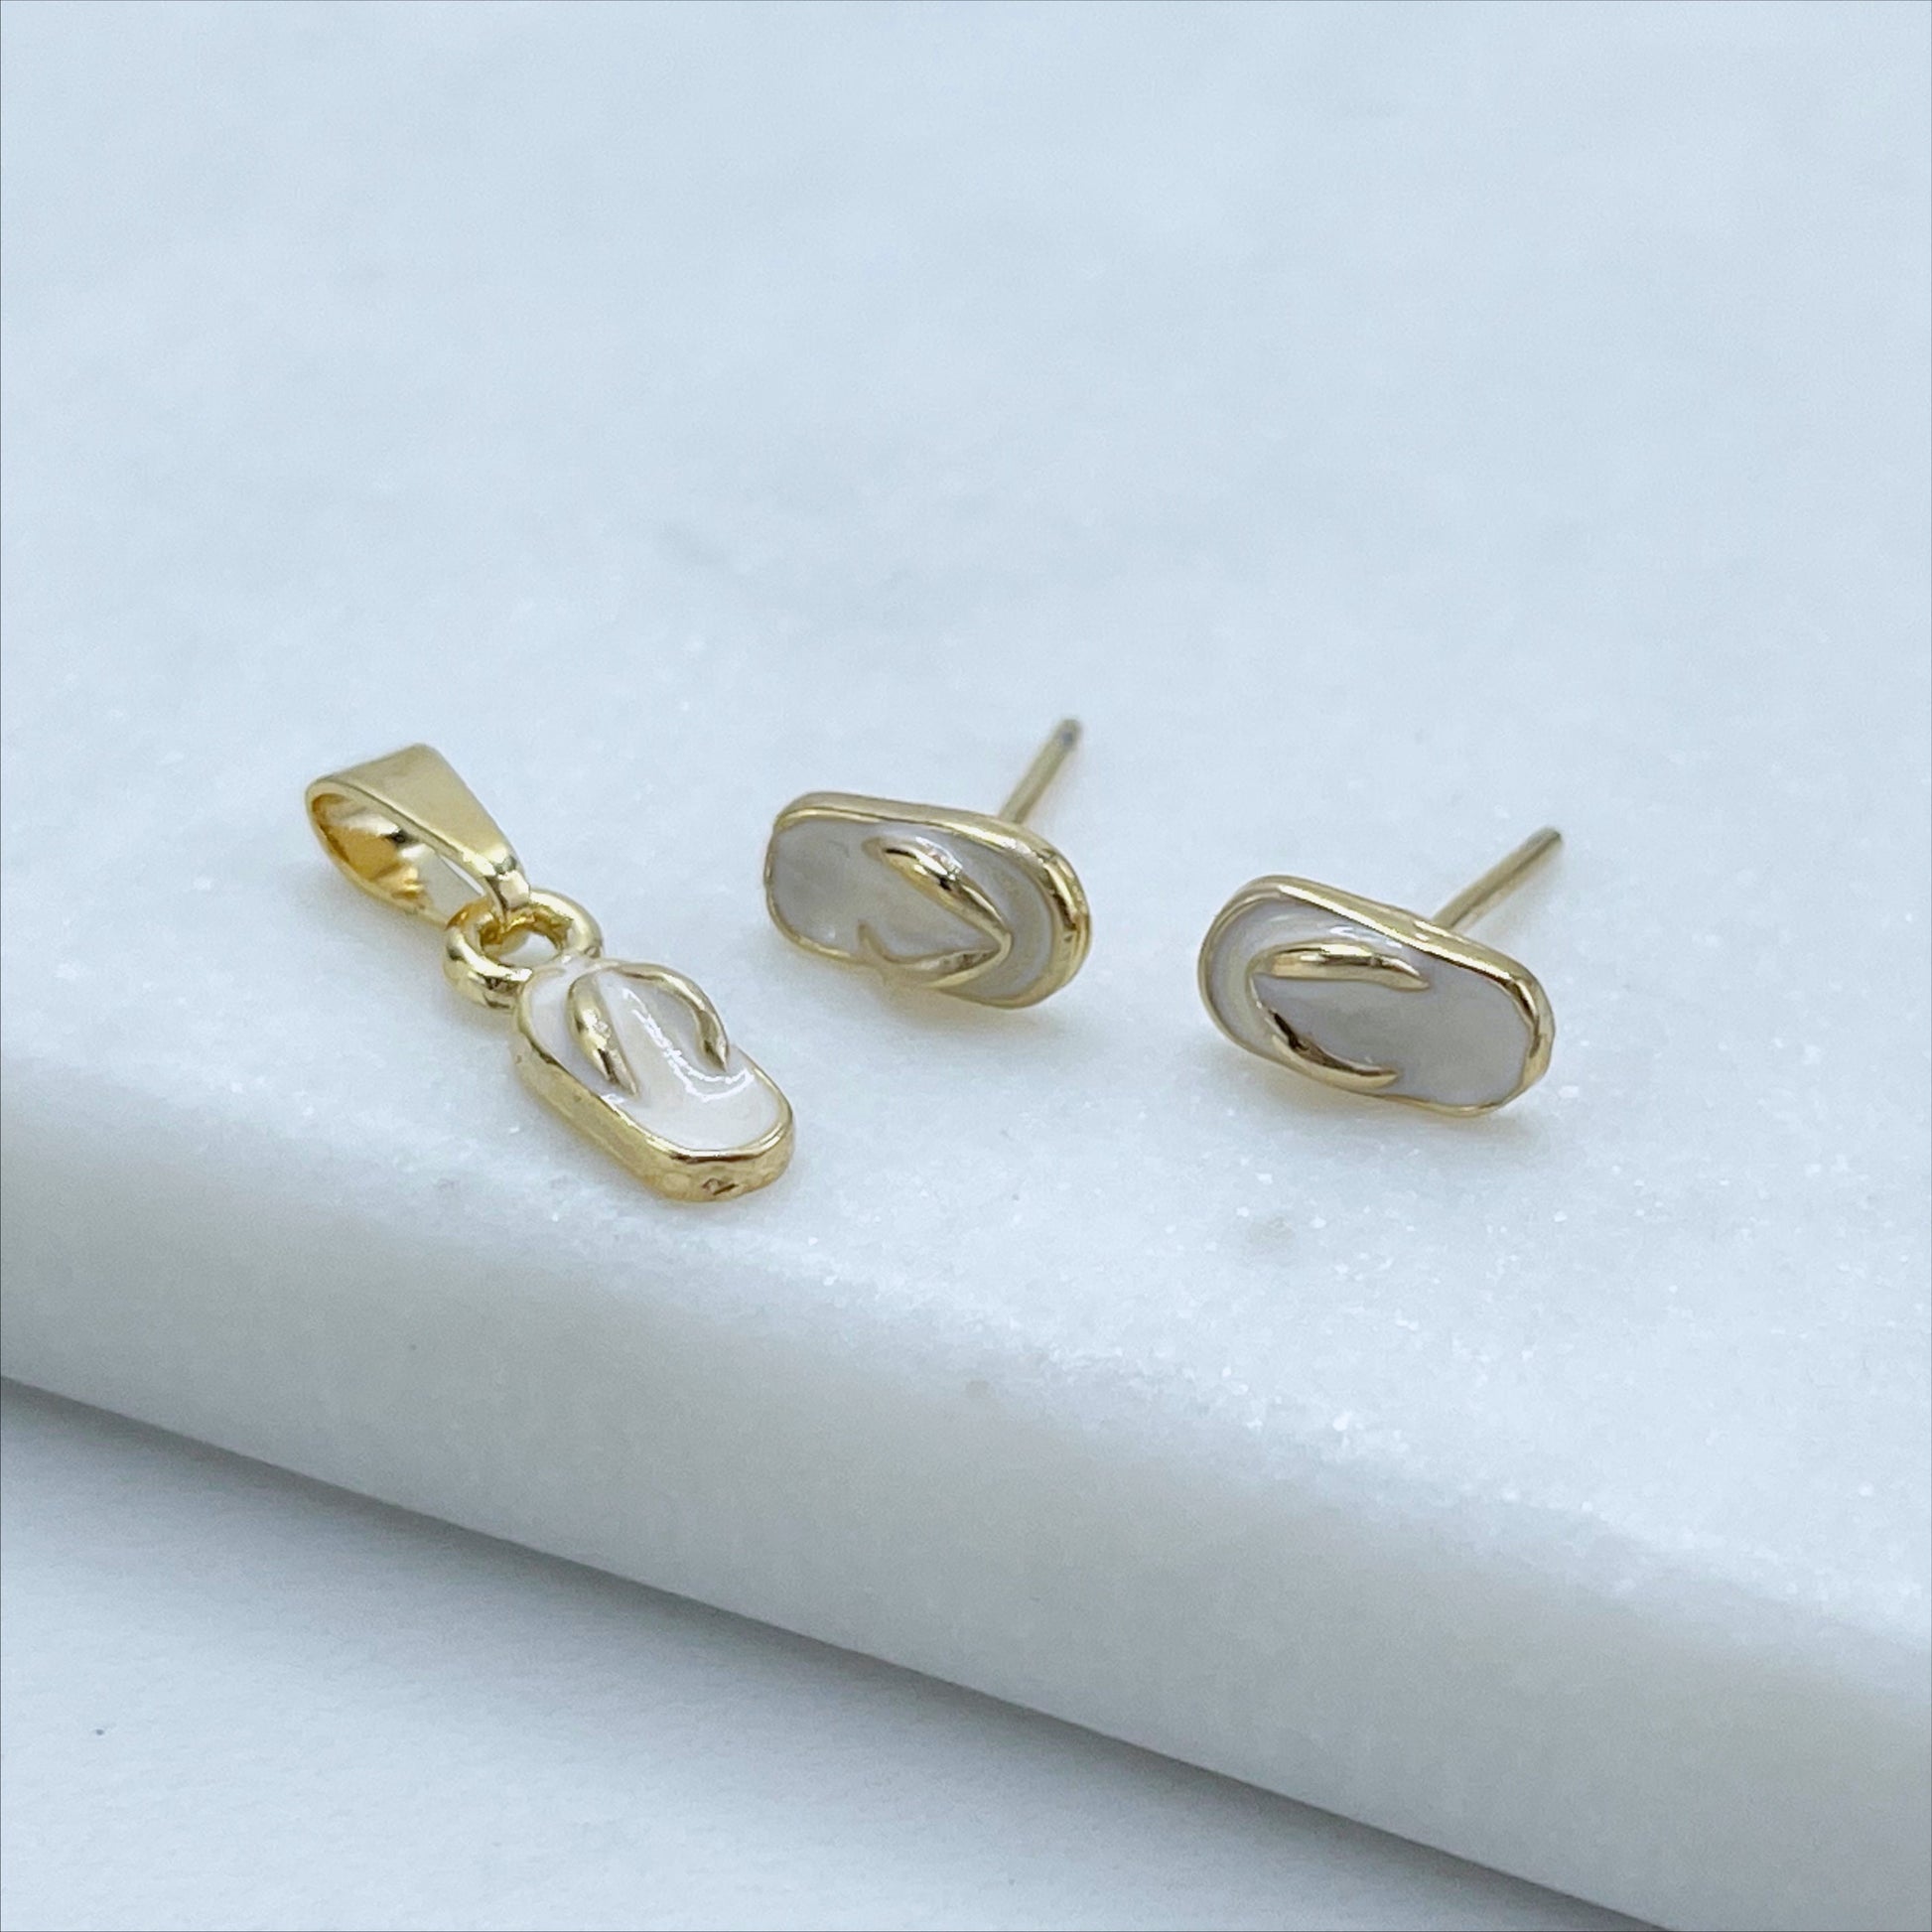 18k Gold Filled 16mm Pendant & 8mm Earrings Blue or White Flip Flops Set, Wholesale Jewelry Making Supplies